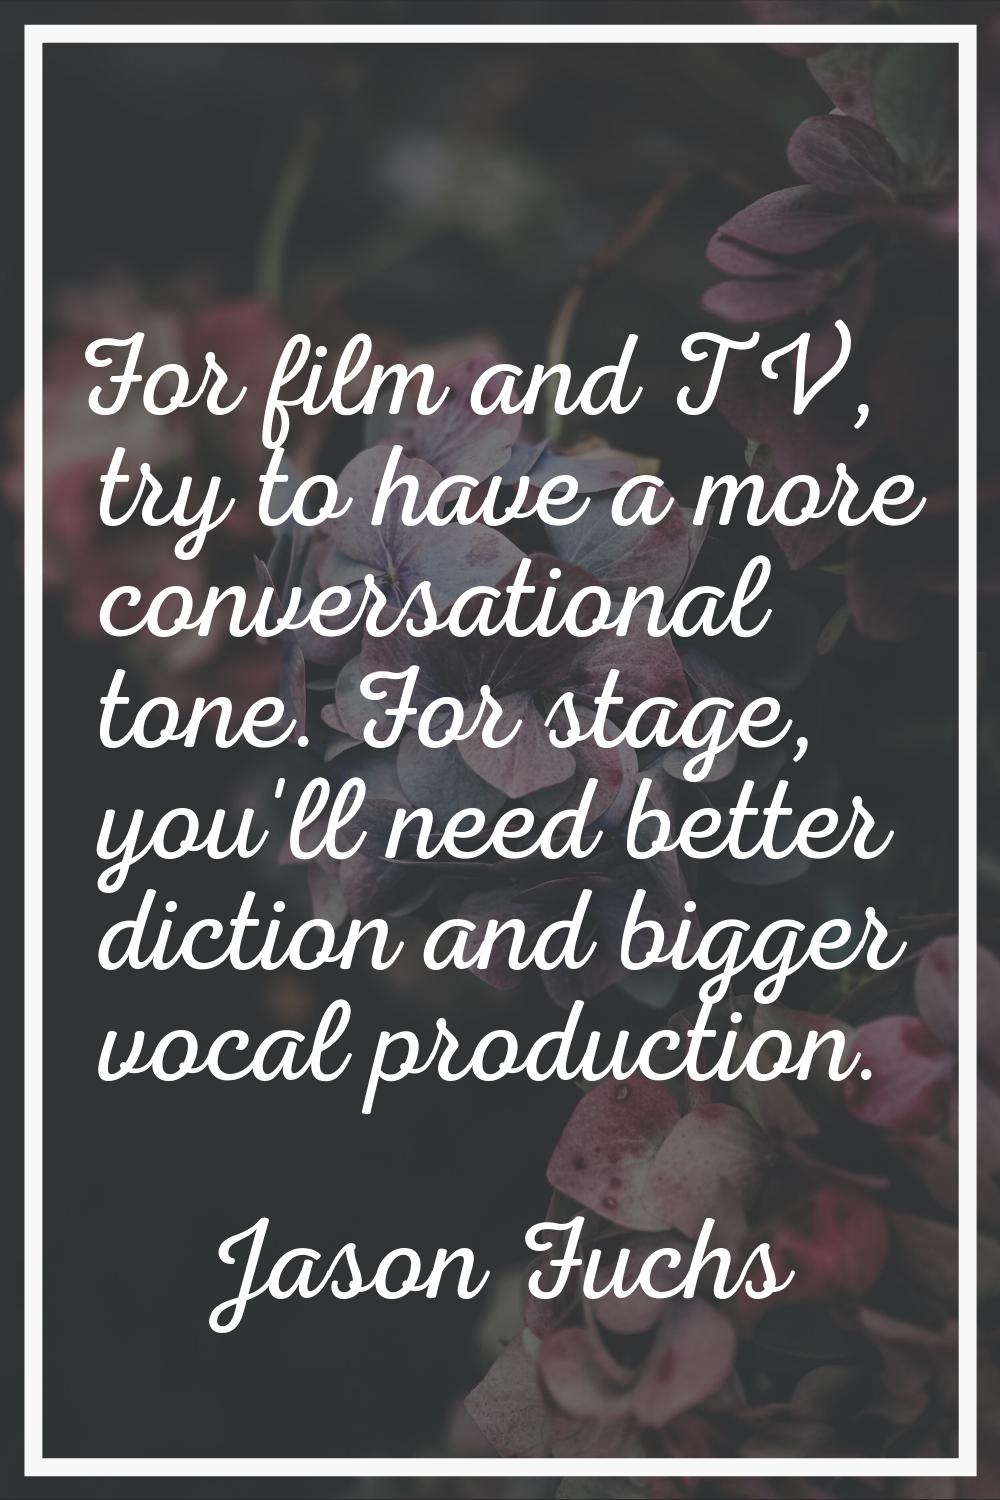 For film and TV, try to have a more conversational tone. For stage, you'll need better diction and 